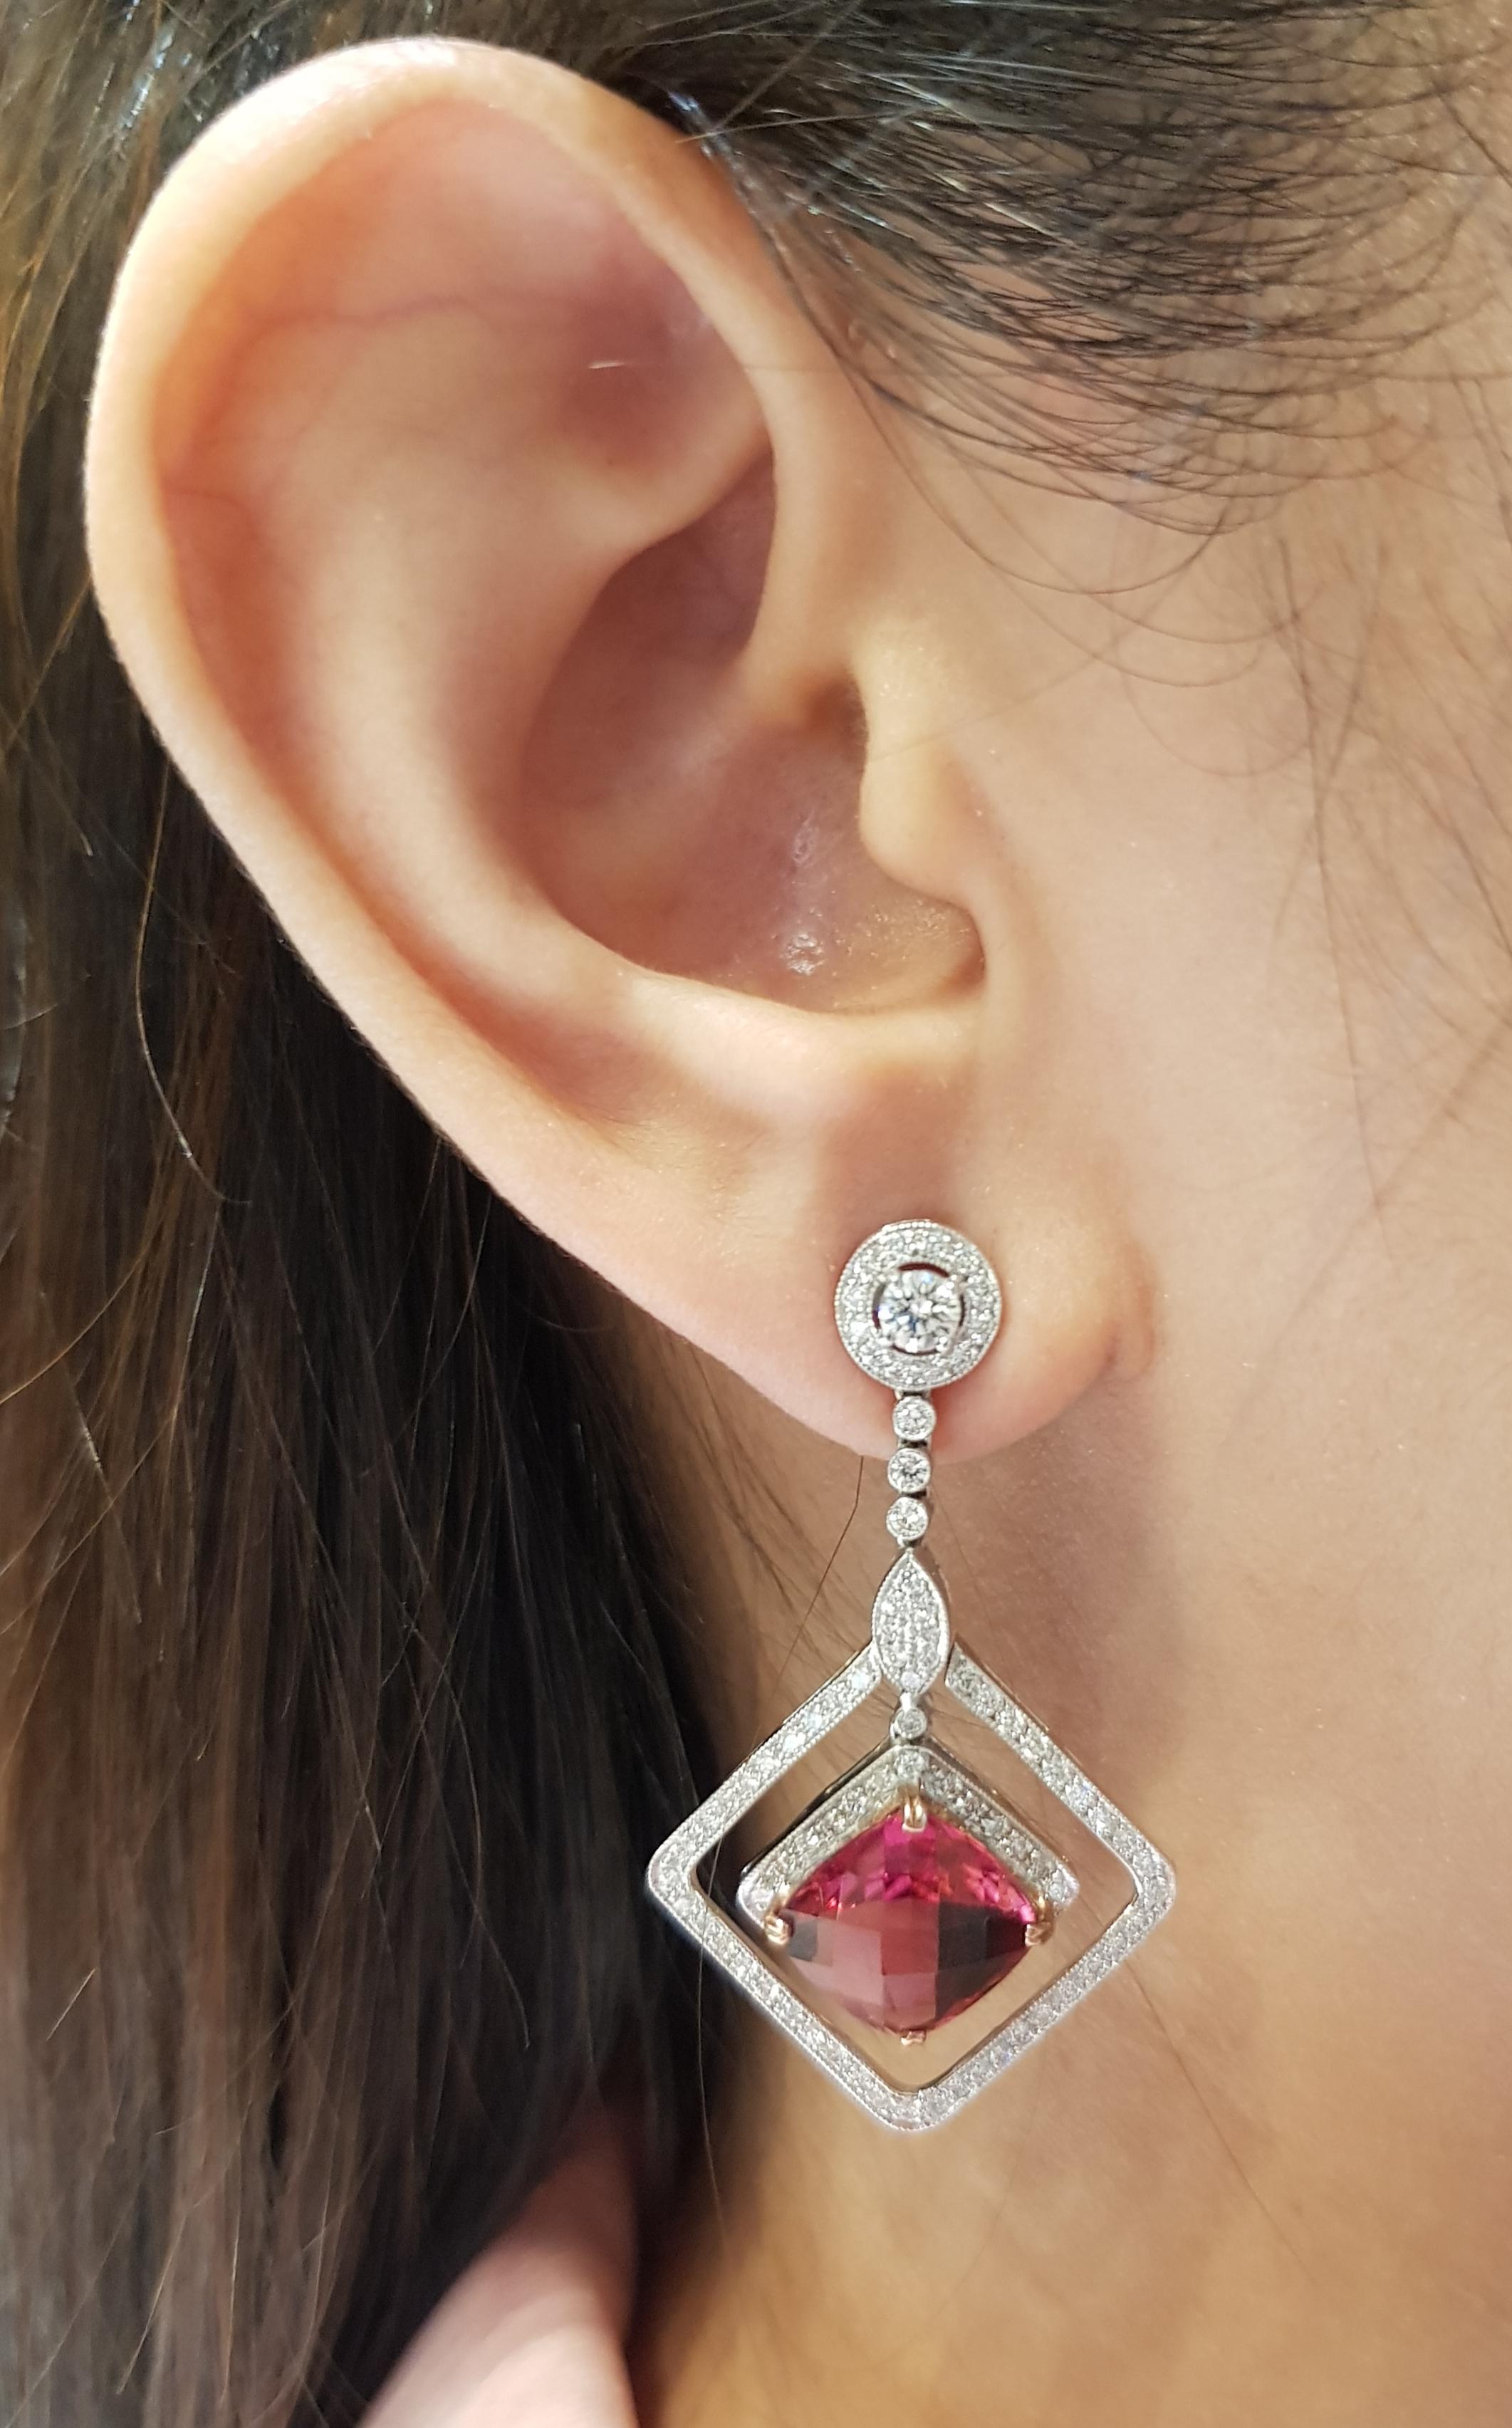 Rubellite 7.26 carats with Diamond 0.30 carat Earrings set in 18 Karat White Gold Settings

Width:  2.4 cm 
Length:  4.2 cm
Total Weight: 11.81 grams

